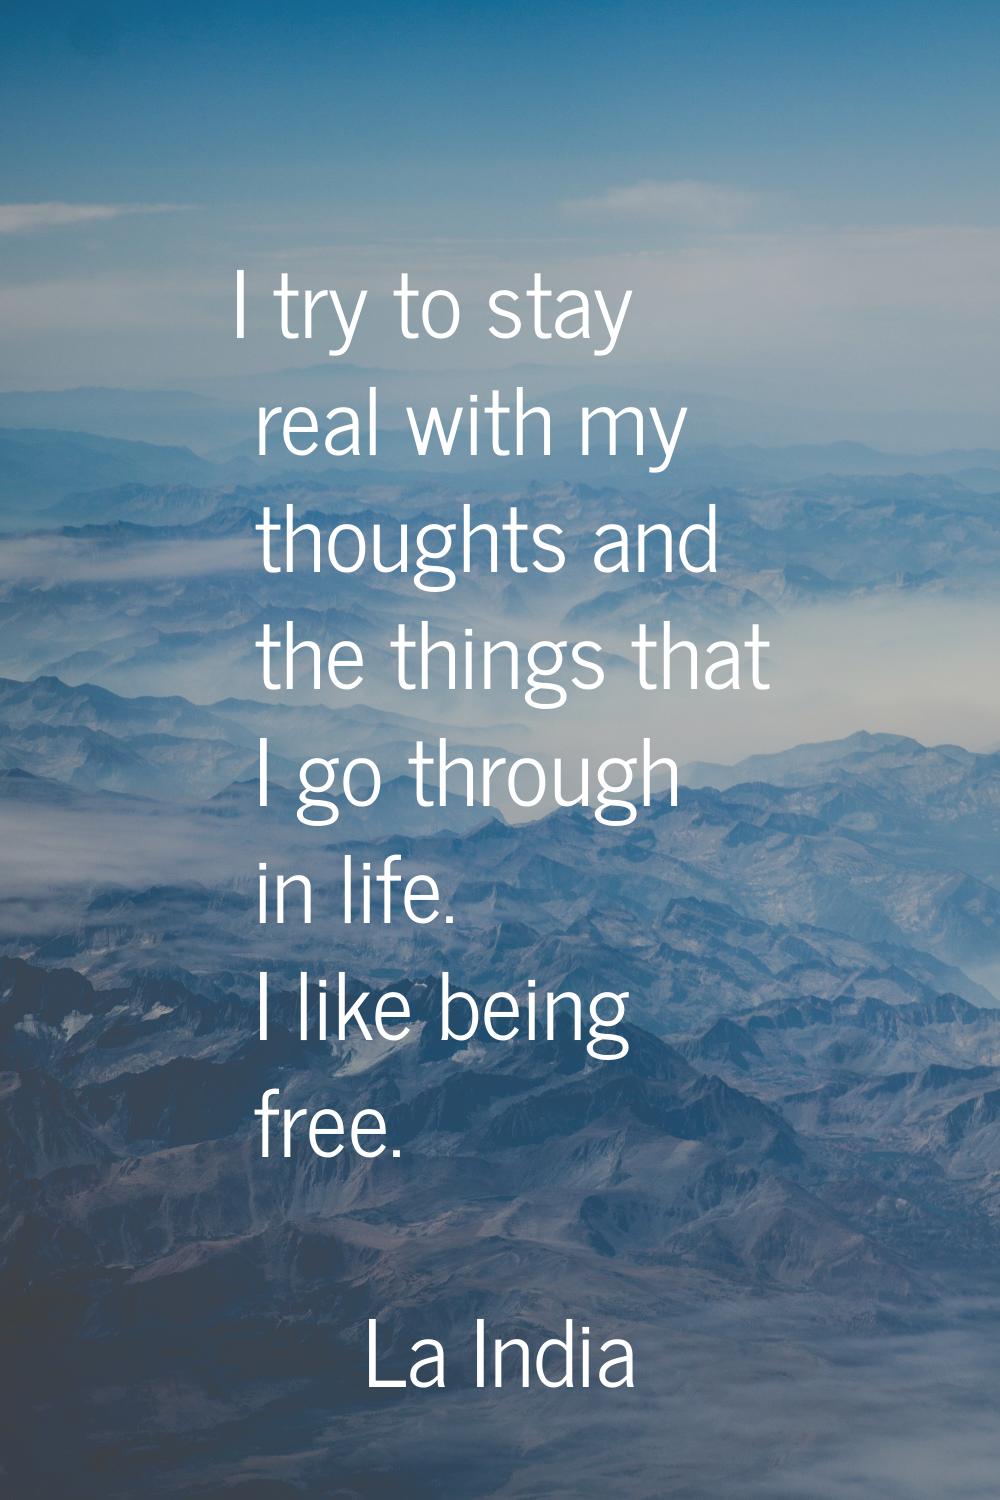 I try to stay real with my thoughts and the things that I go through in life. I like being free.